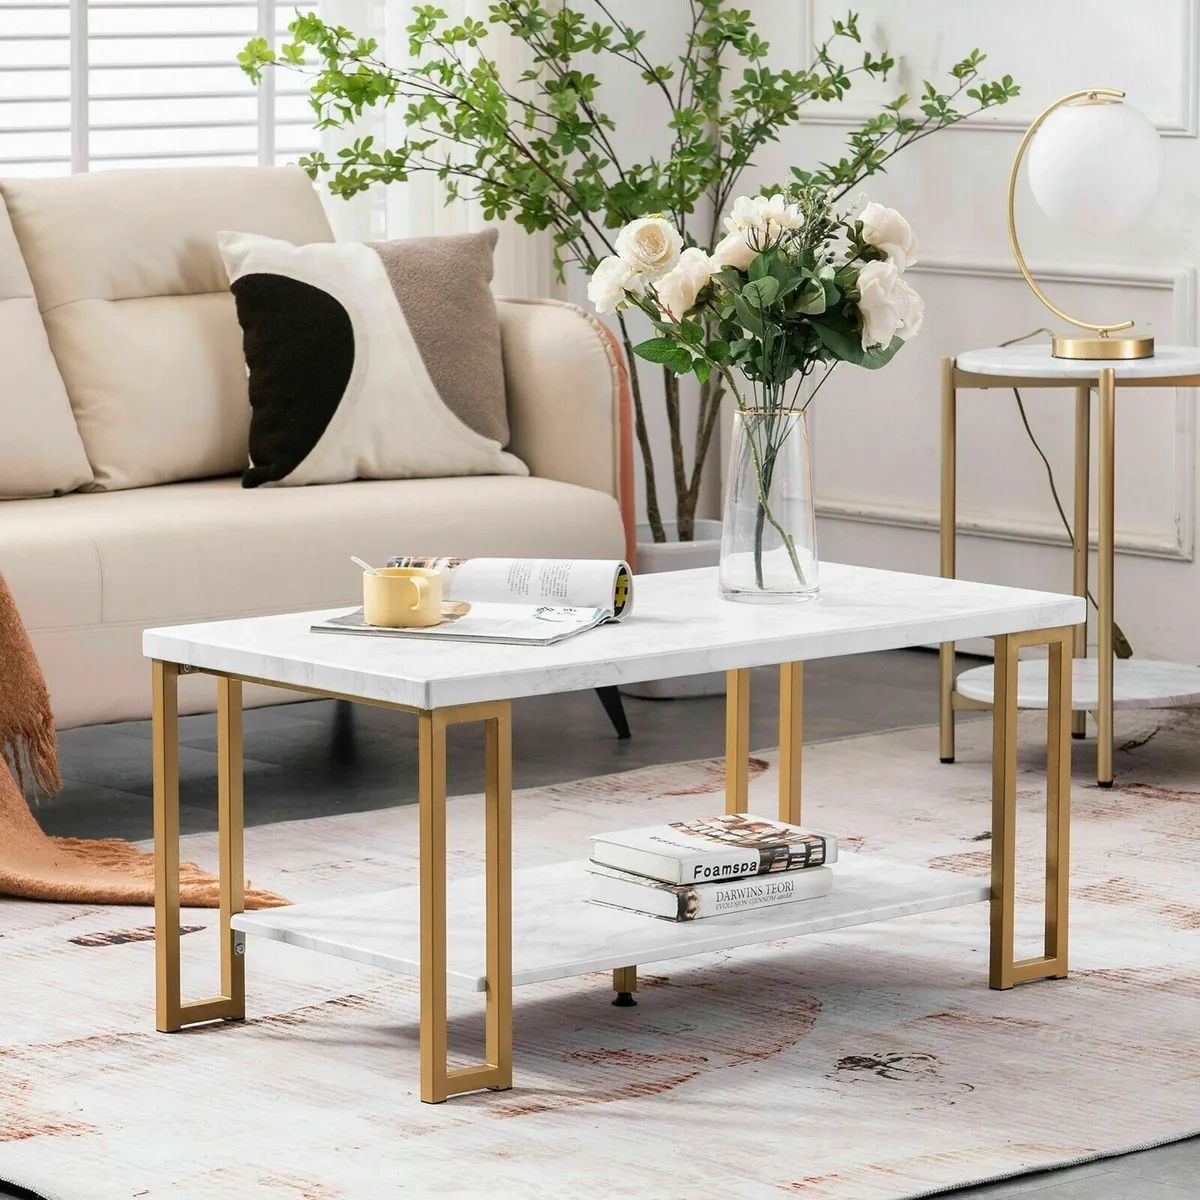 Modern Living Room Rectangle Coffee Table White Faux Marble Top &Gold Base  Shelf | Ebay Pertaining To Rectangular Coffee Tables With Pedestal Bases (View 5 of 15)